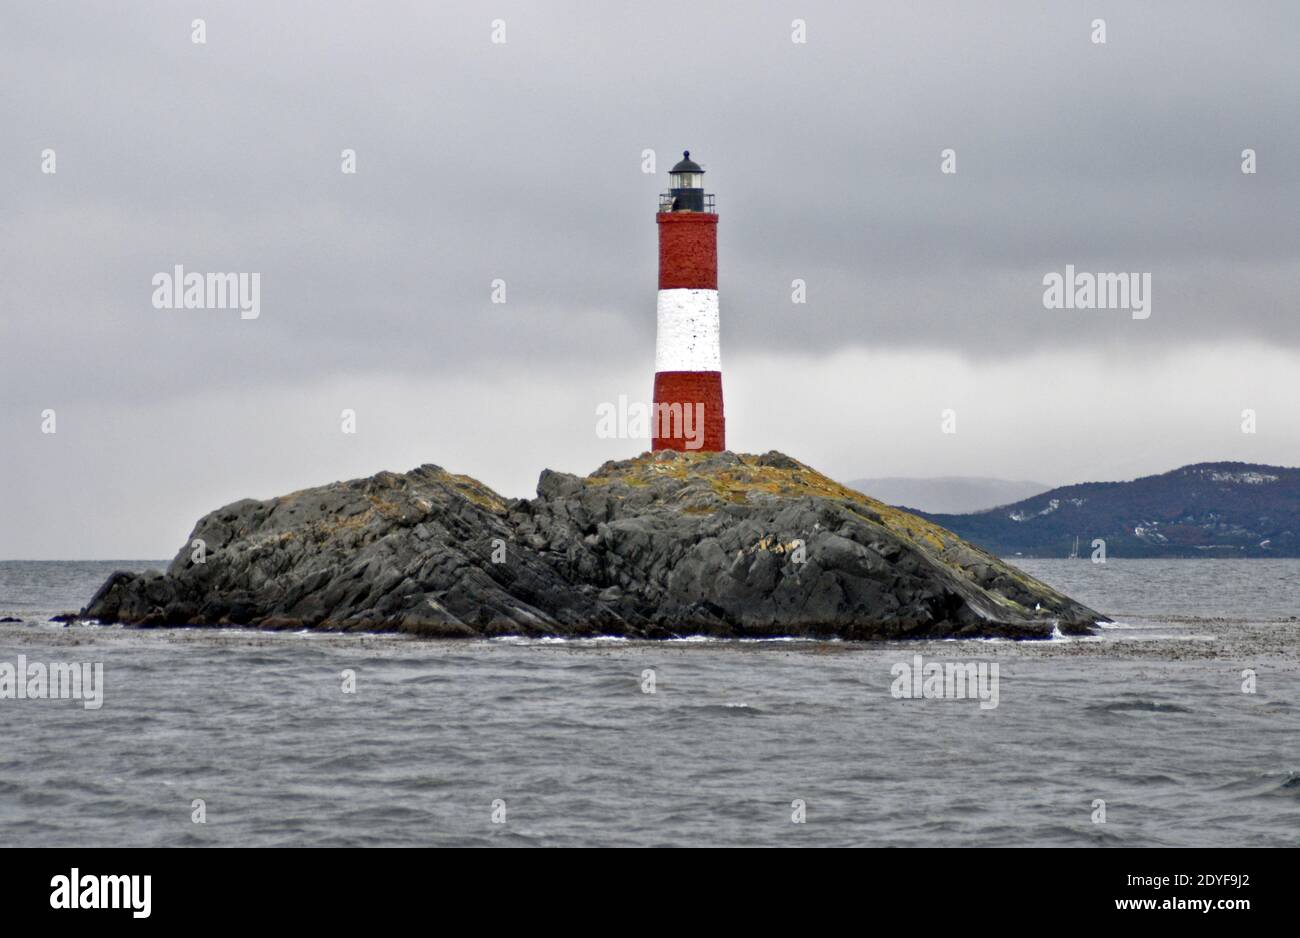 Les Eclaireurs Lighthouse - Lighthouse at the End of the World ('Faro del Fin del Mundo'), Ushuaia, Tierra del Fuego, Argentina Stock Photo